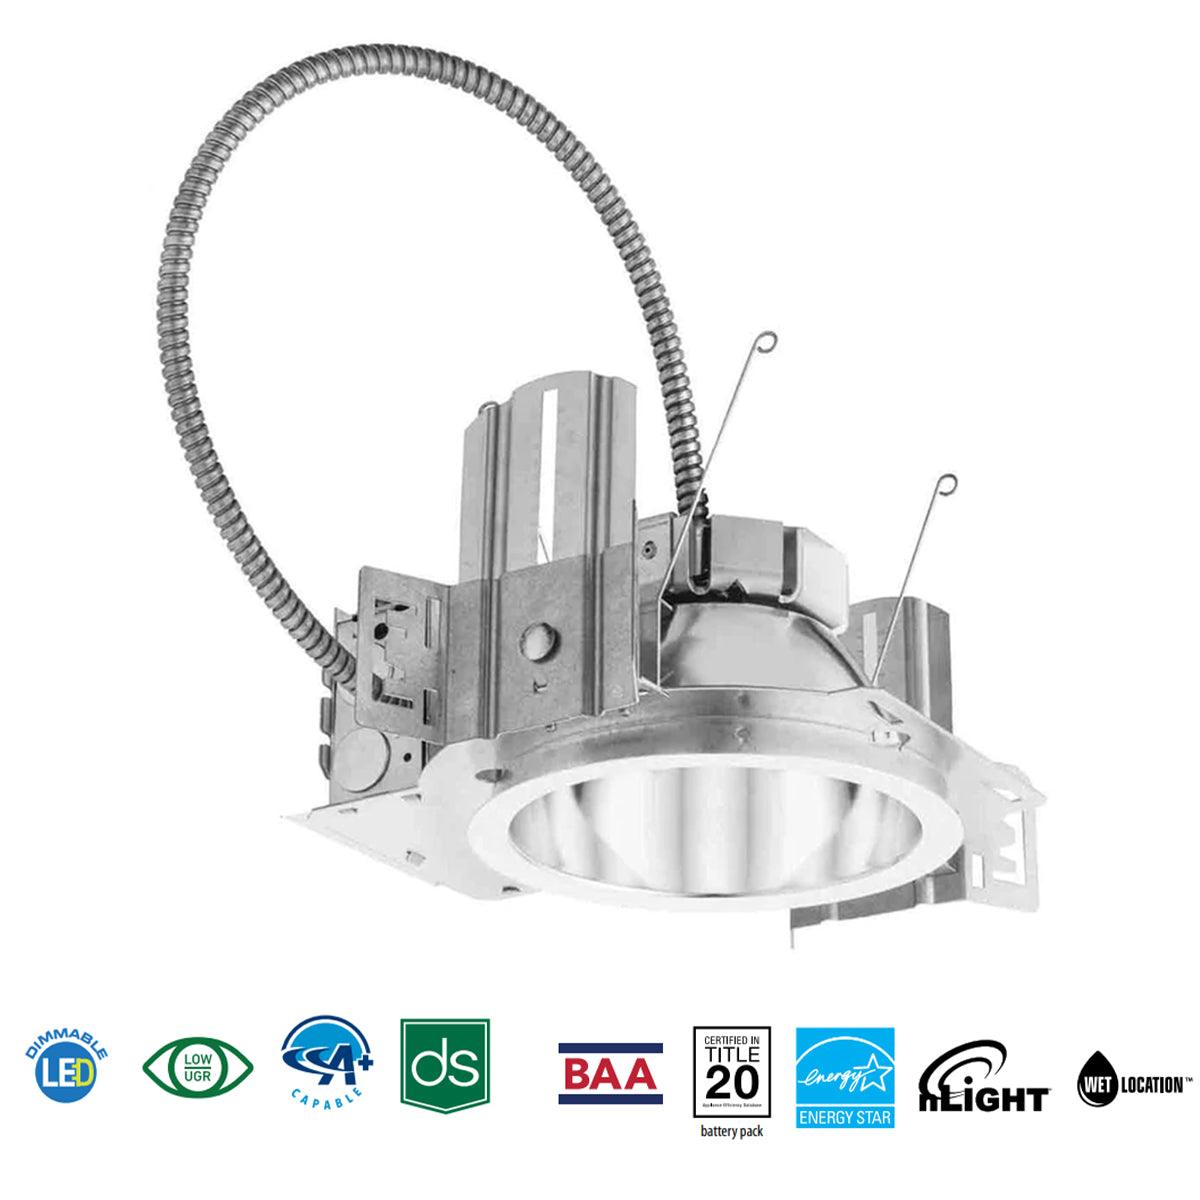 Lithonia LDN6 Commercial LED Recessed Downlight, 1500 lumens, 3500K (Reflector Sold Separately)